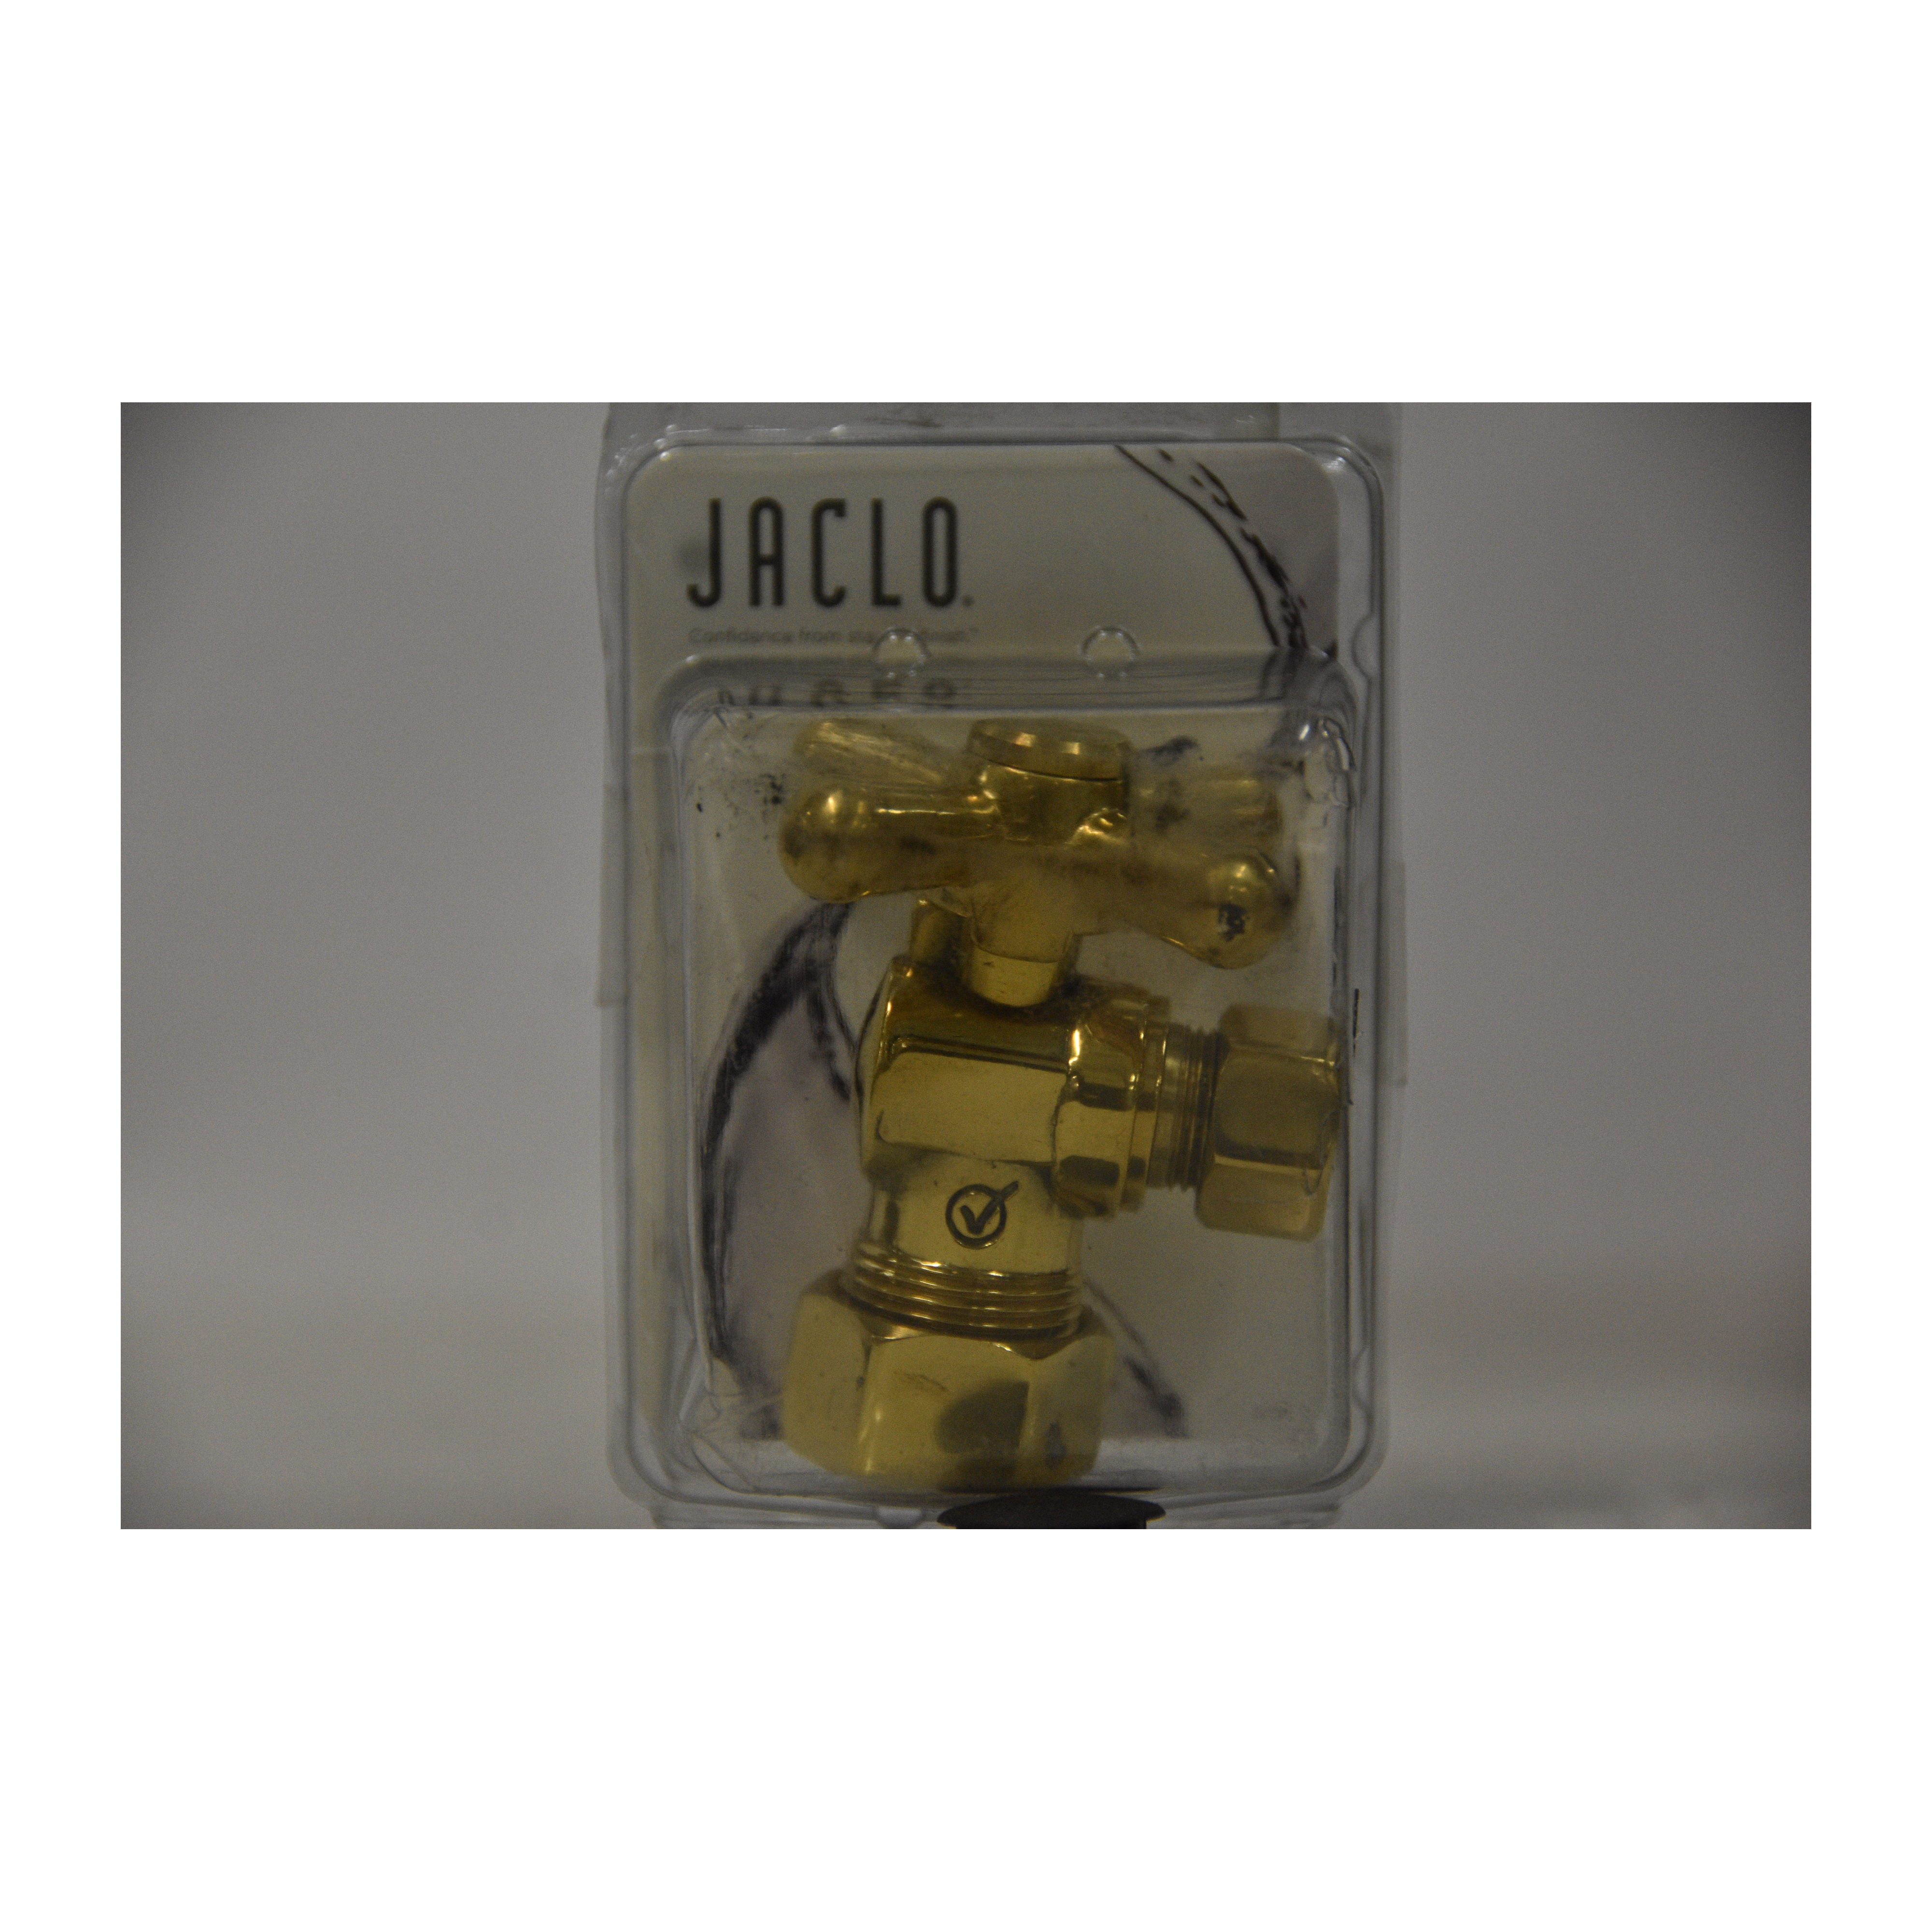 Tristan Brass Jaclo 616-2-72-TB 1/2 IPS x 3/8 OD Compression Valve Kit with Contemporary Round Lever Handle